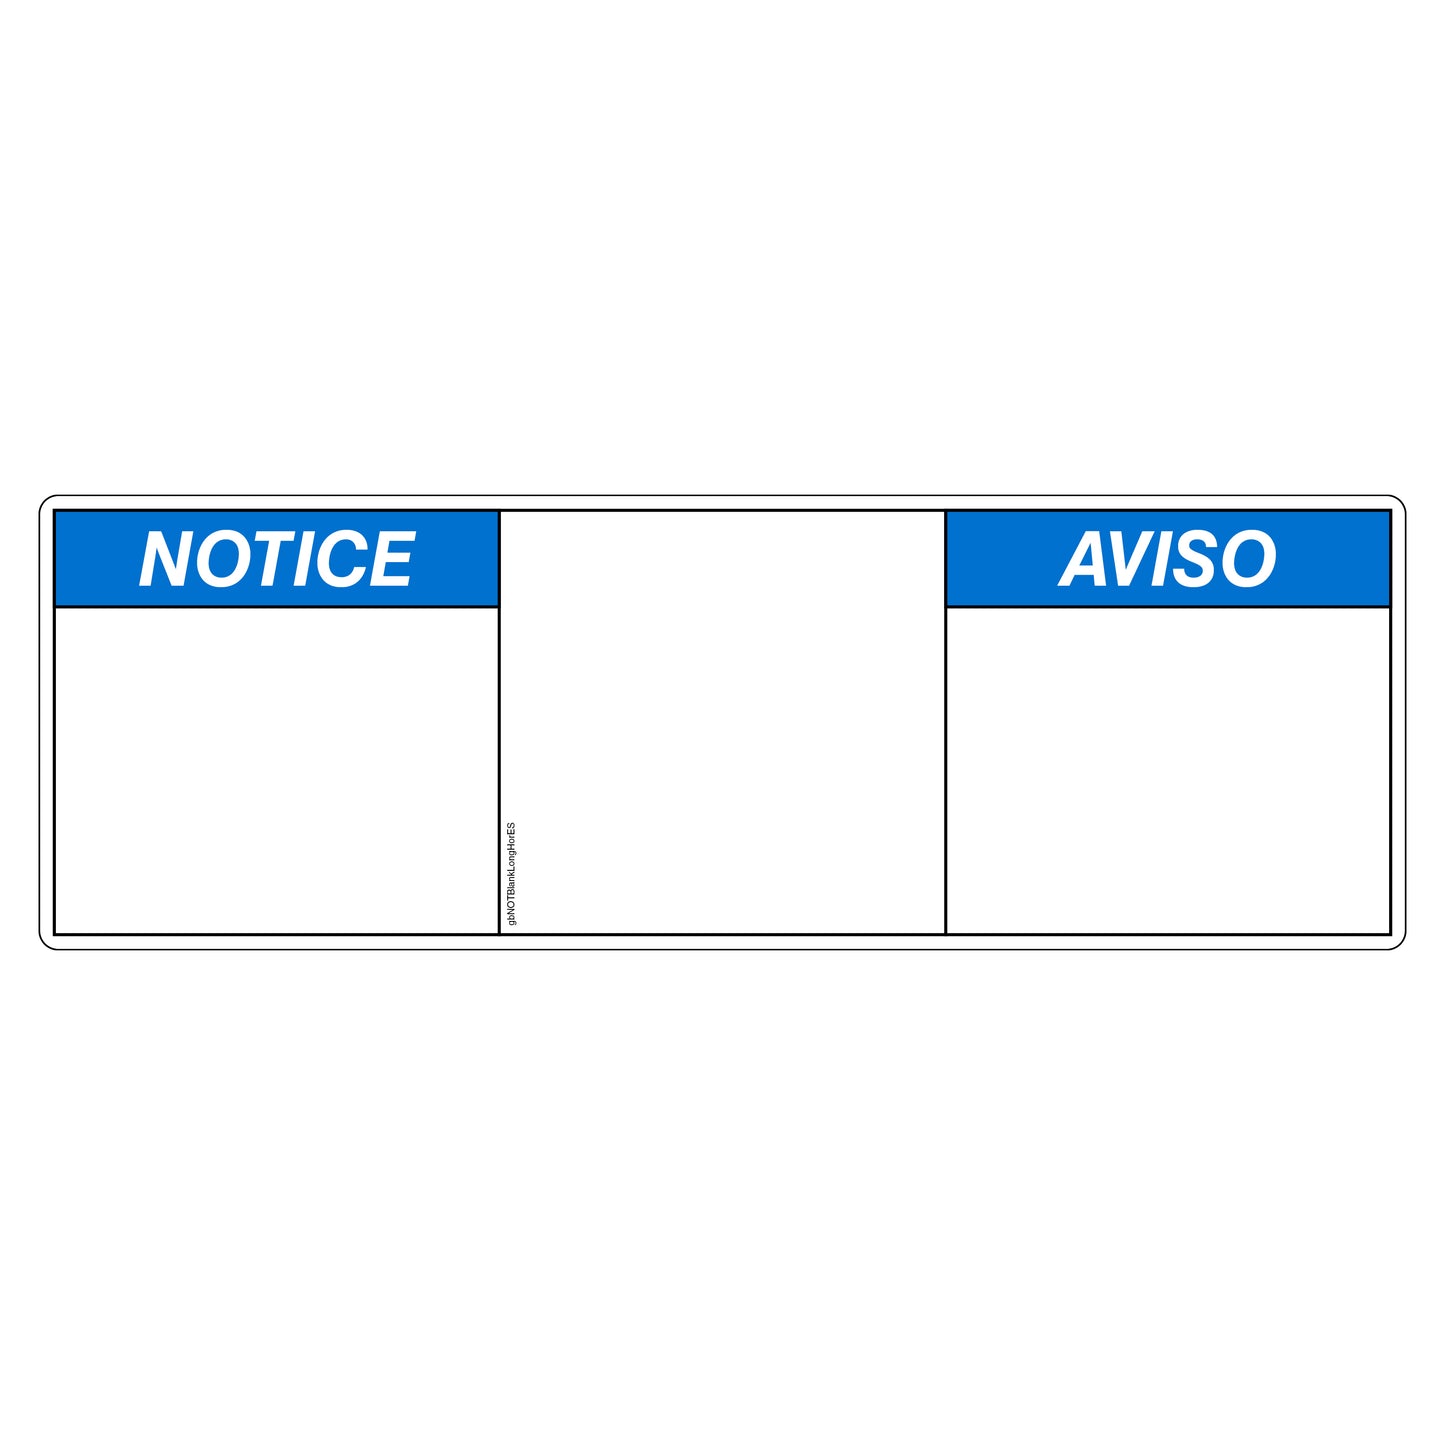 Customizable notice decal for long, bilingual messages